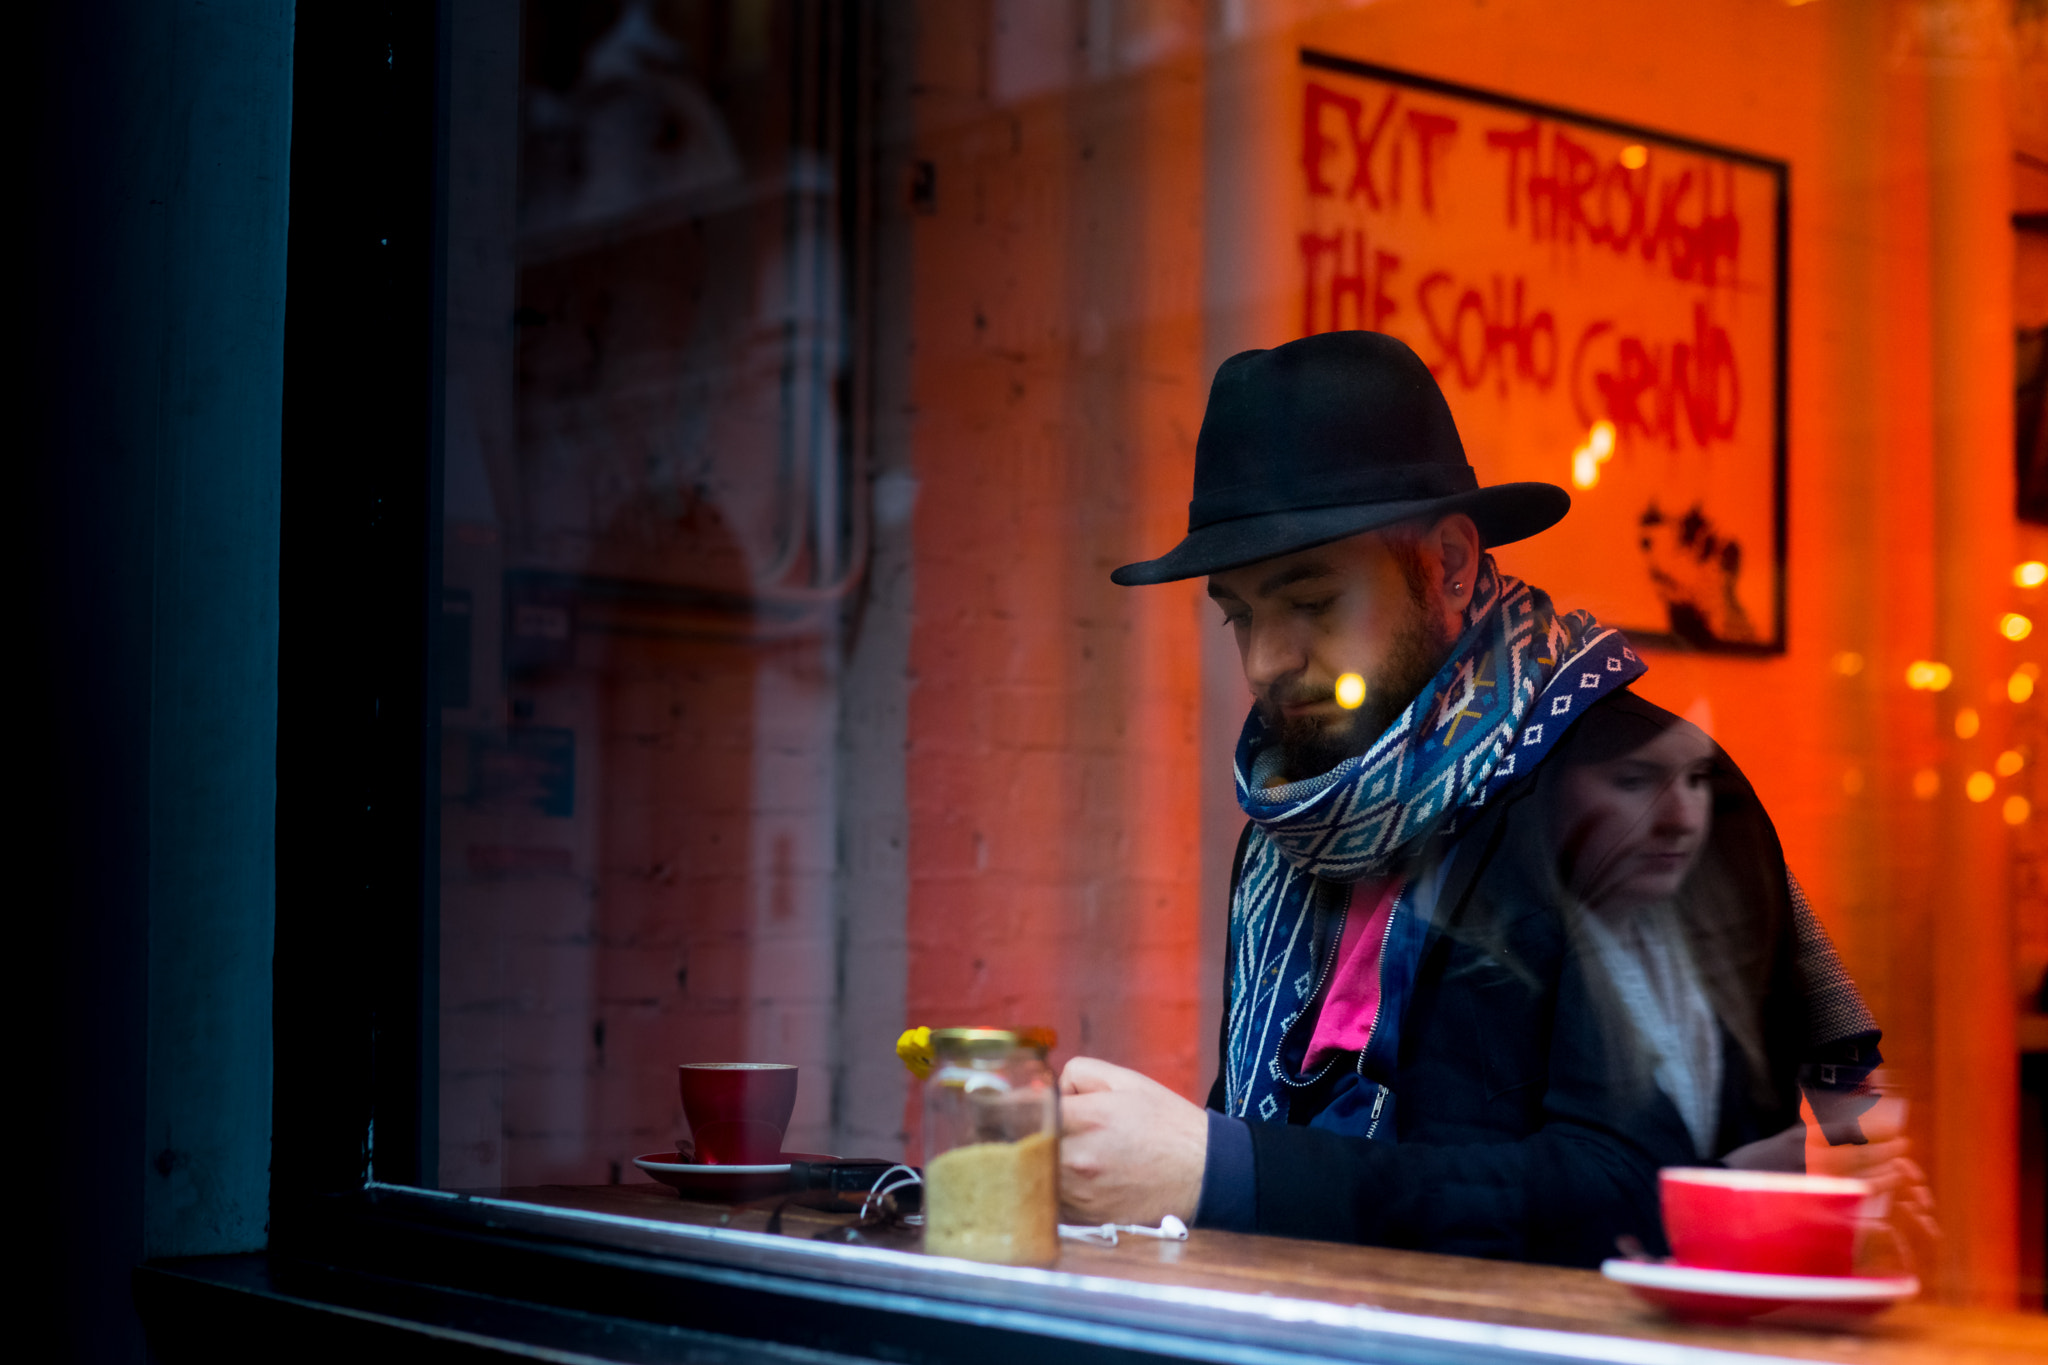 Sony a7 II + Sony 50mm F1.4 sample photo. Exit through the soho grind photography